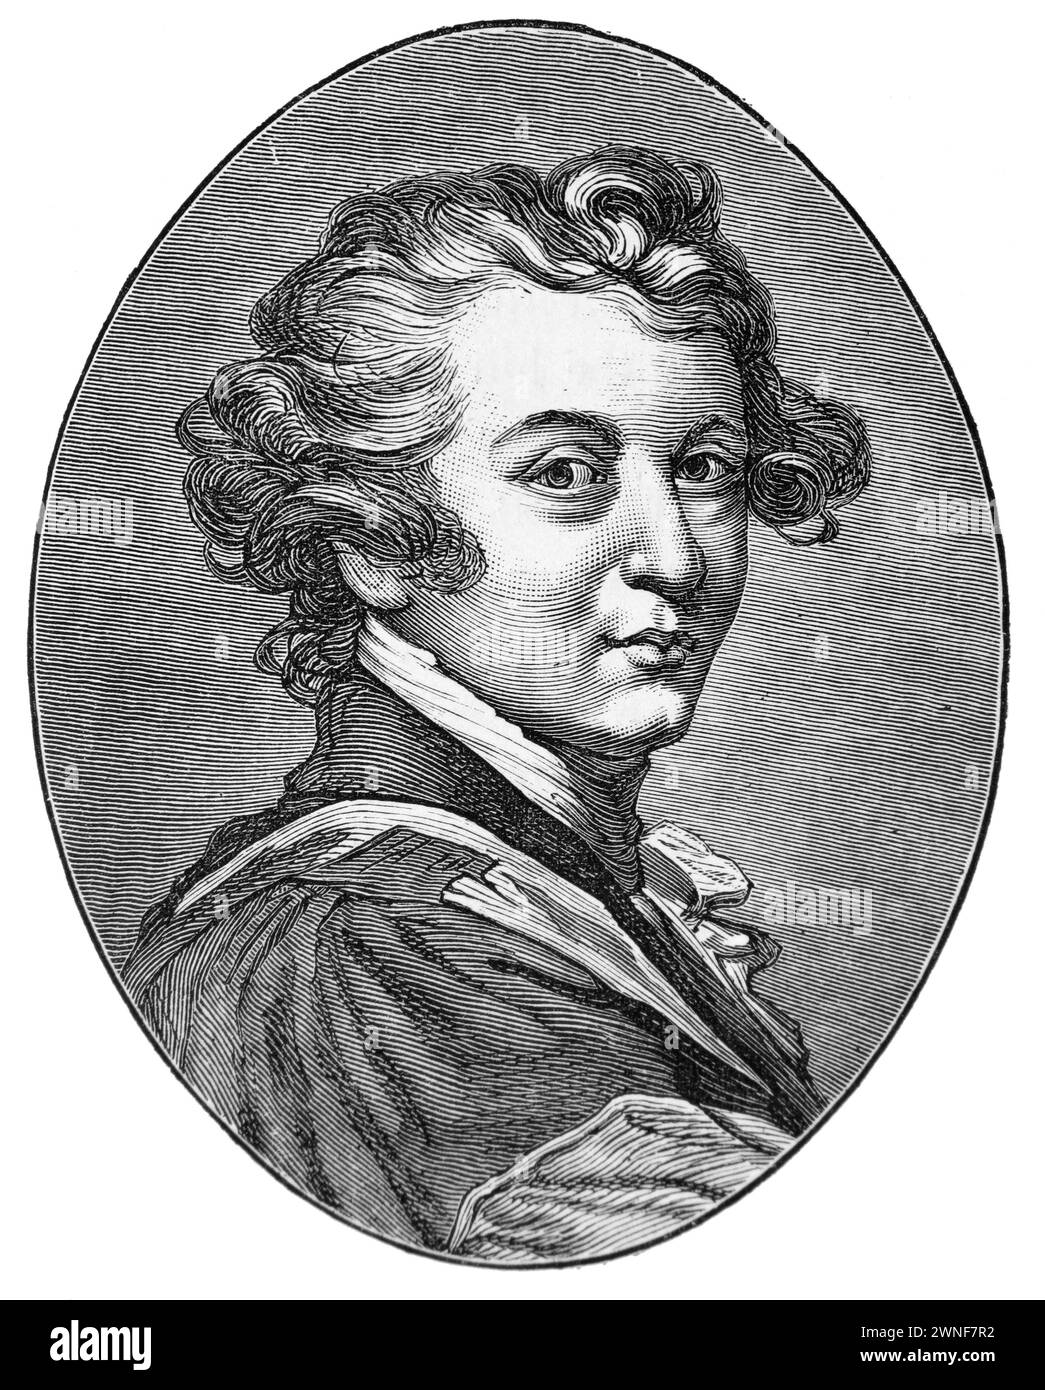 Portrait of Sir Joshua Reynolds 19th century; Black and white illustration from 'Our Own Country' a Descriptive, Historical and Pictorial guide to the UK published in late 1880s by Cassell, Petter, Galpin & Co. Historic pictures of Briatin. Stock Photo